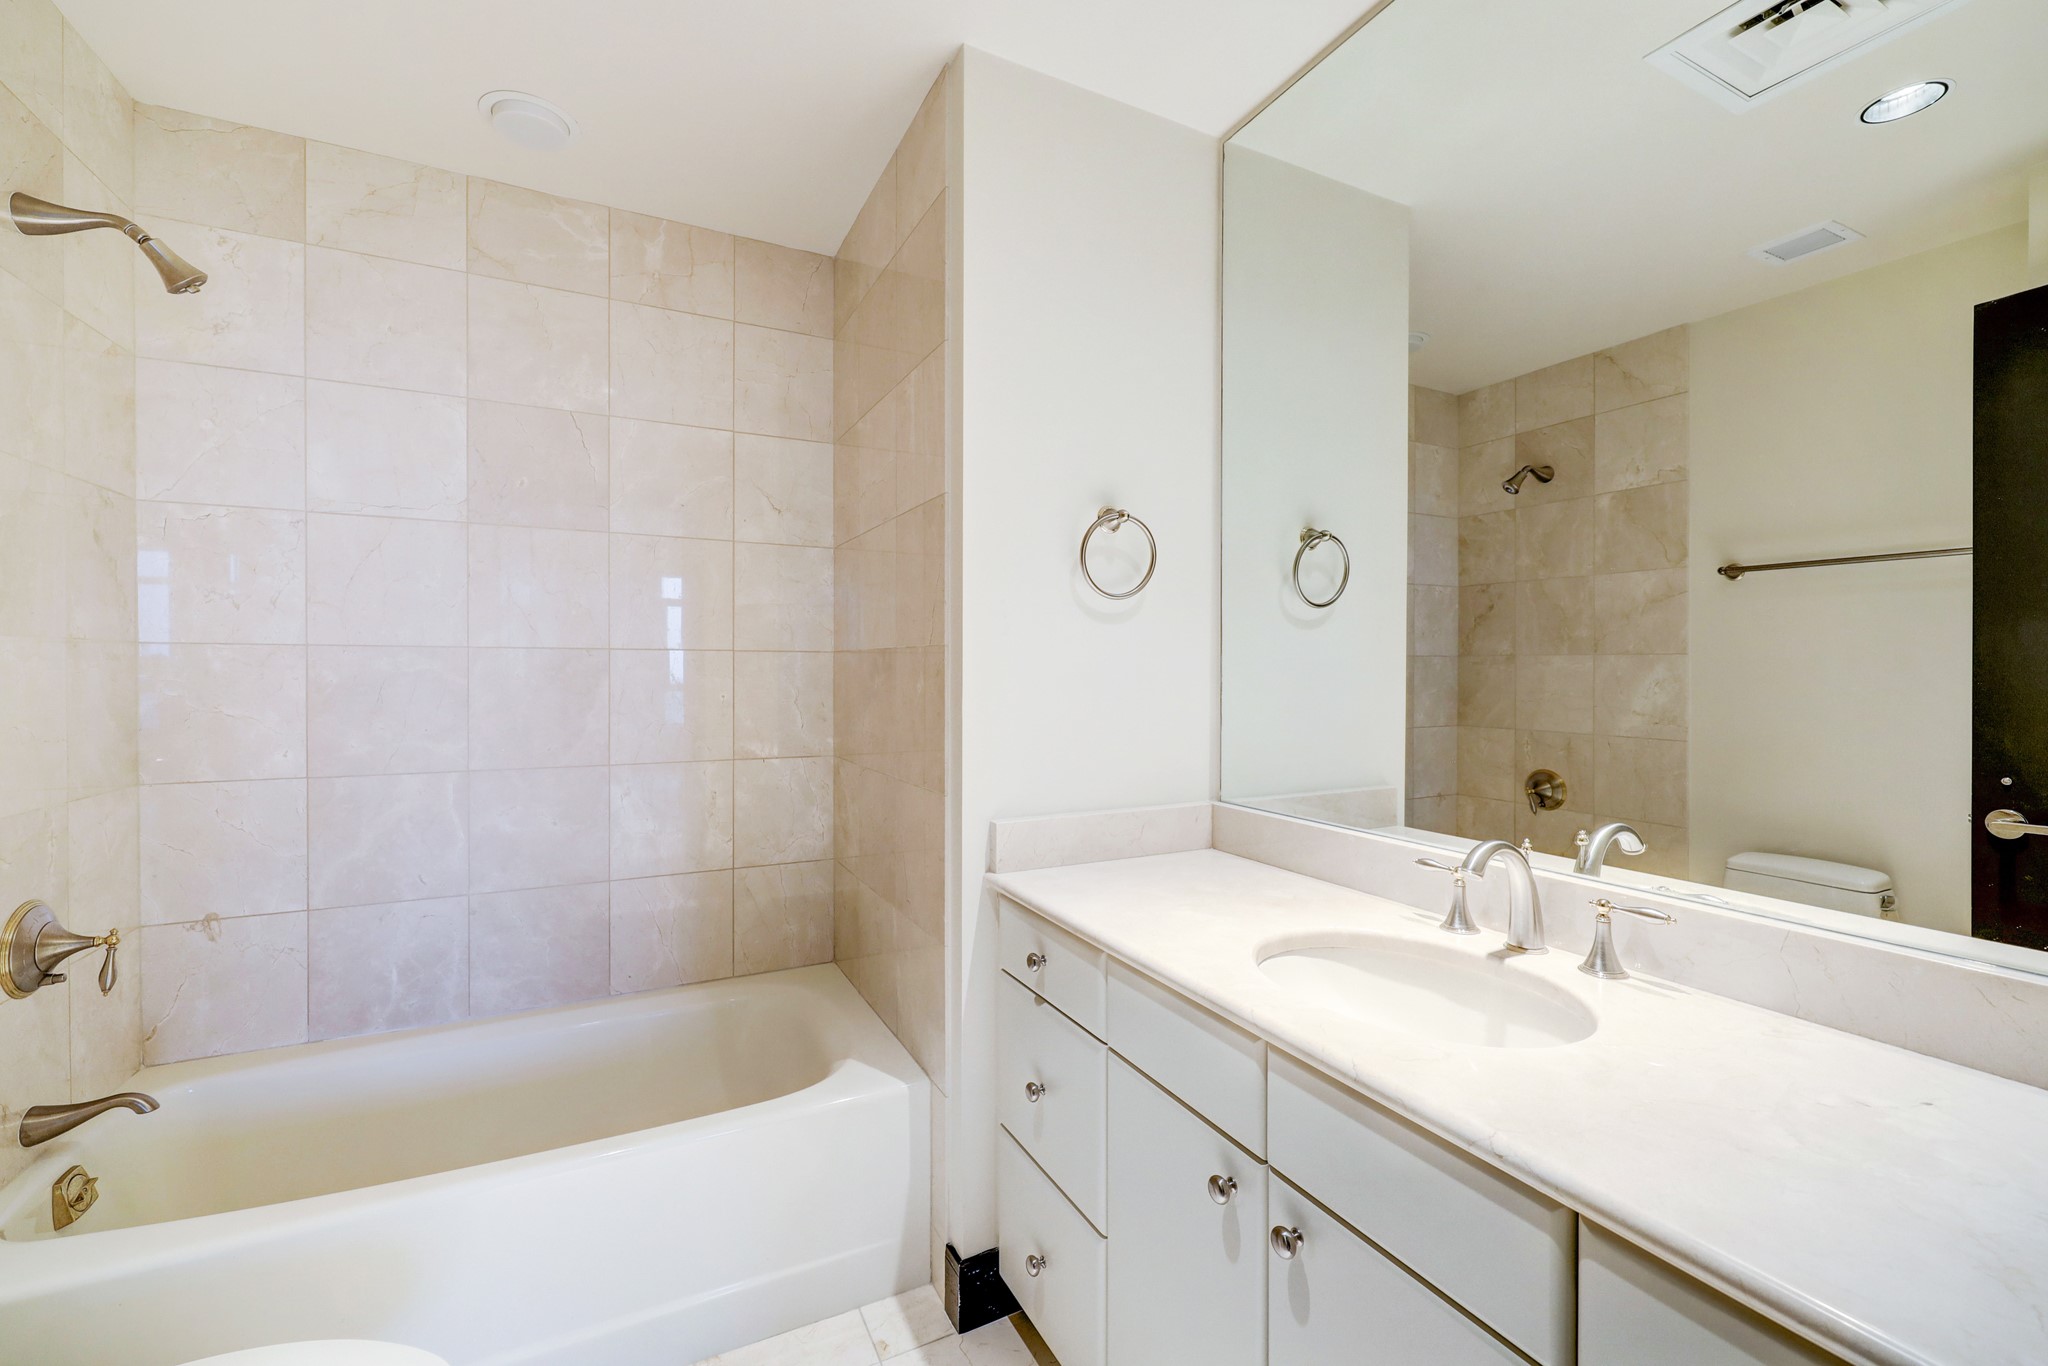 The En-suite Secondary Bathroom features tile floors and walls, and a tub/shower combo.